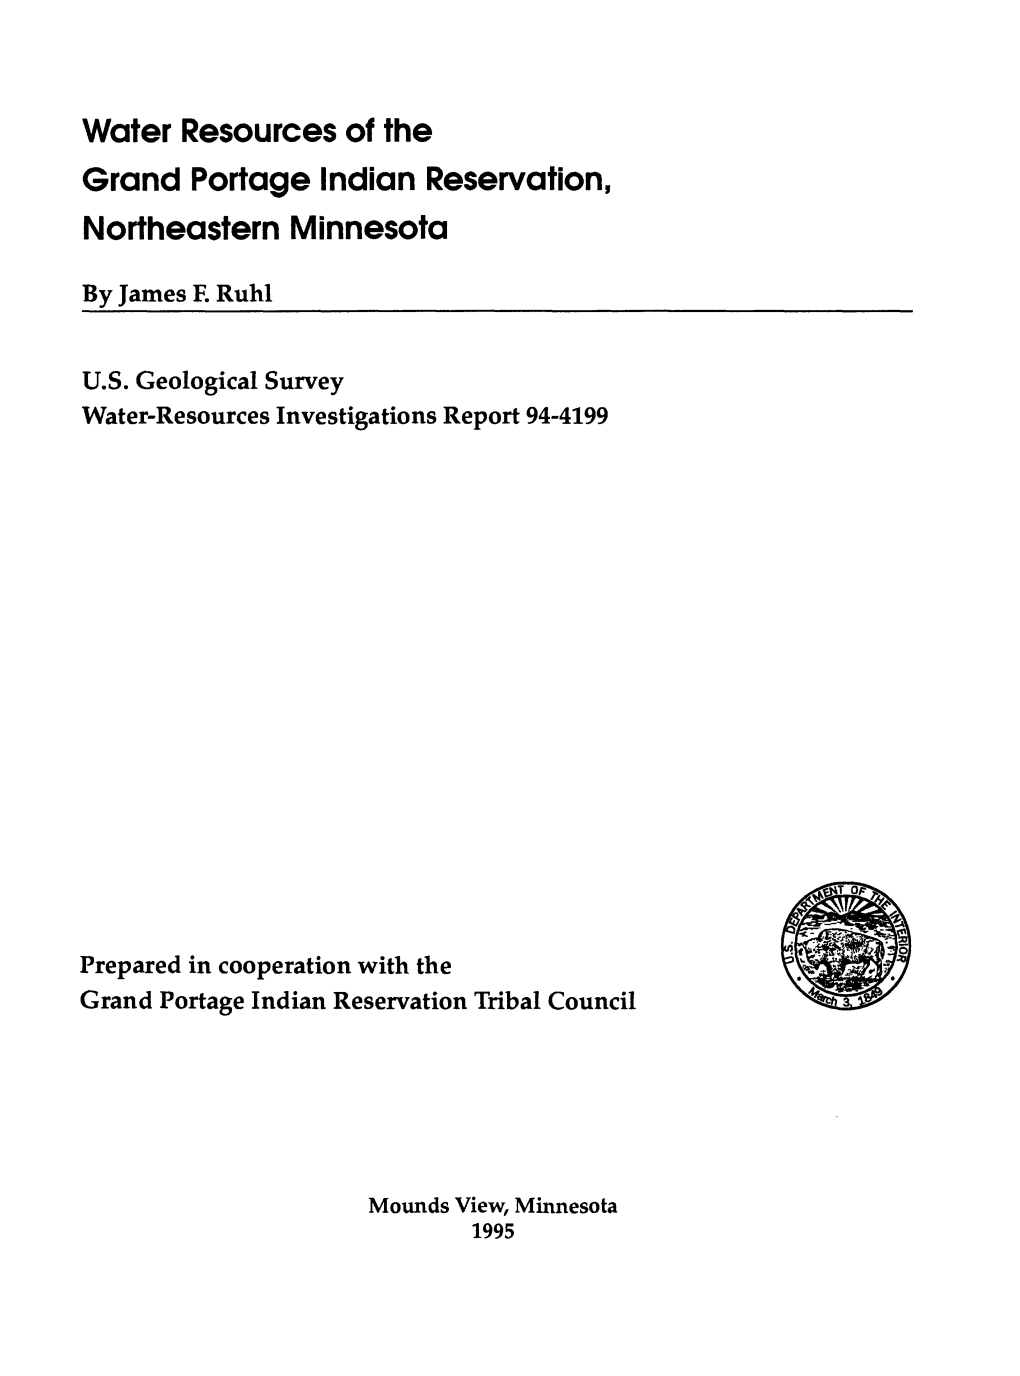 Water Resources of the Grand Portage Indian Reservation, Northeastern Minnesota